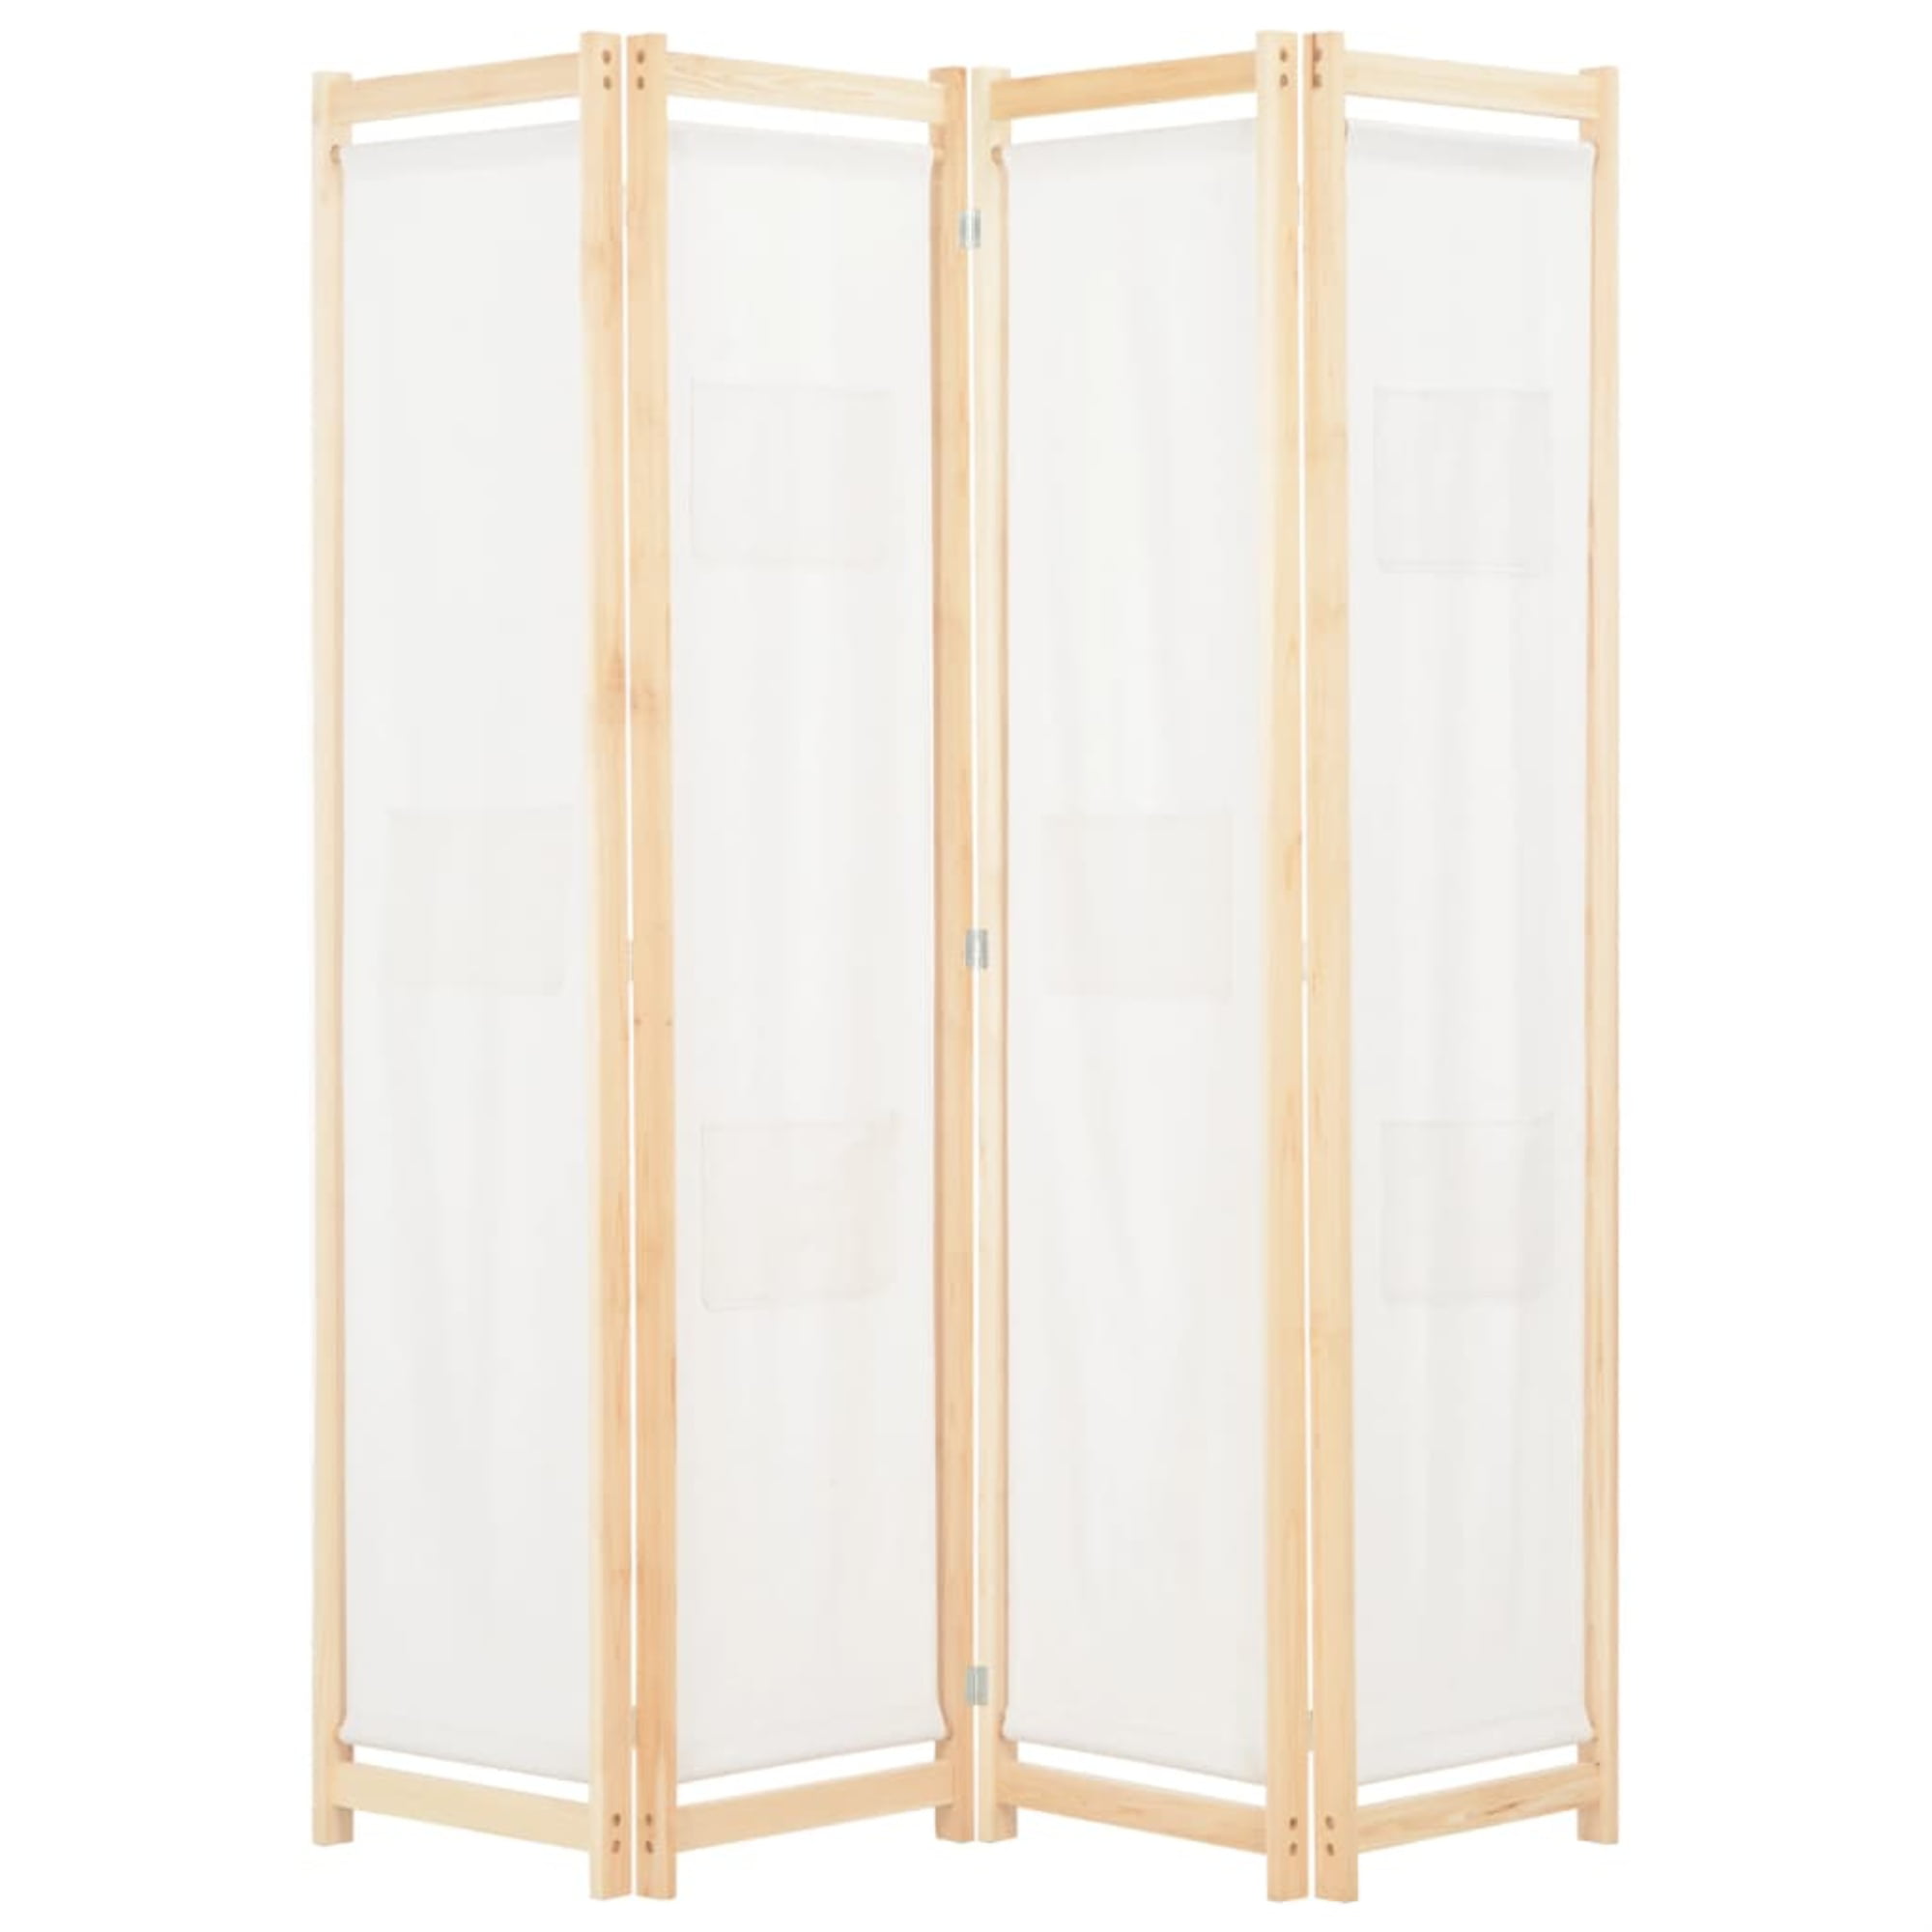 Details about   Folding Room Dividers 4 6 8 Panel Privacy Screens Home Decor Diamond Weave Fiber 